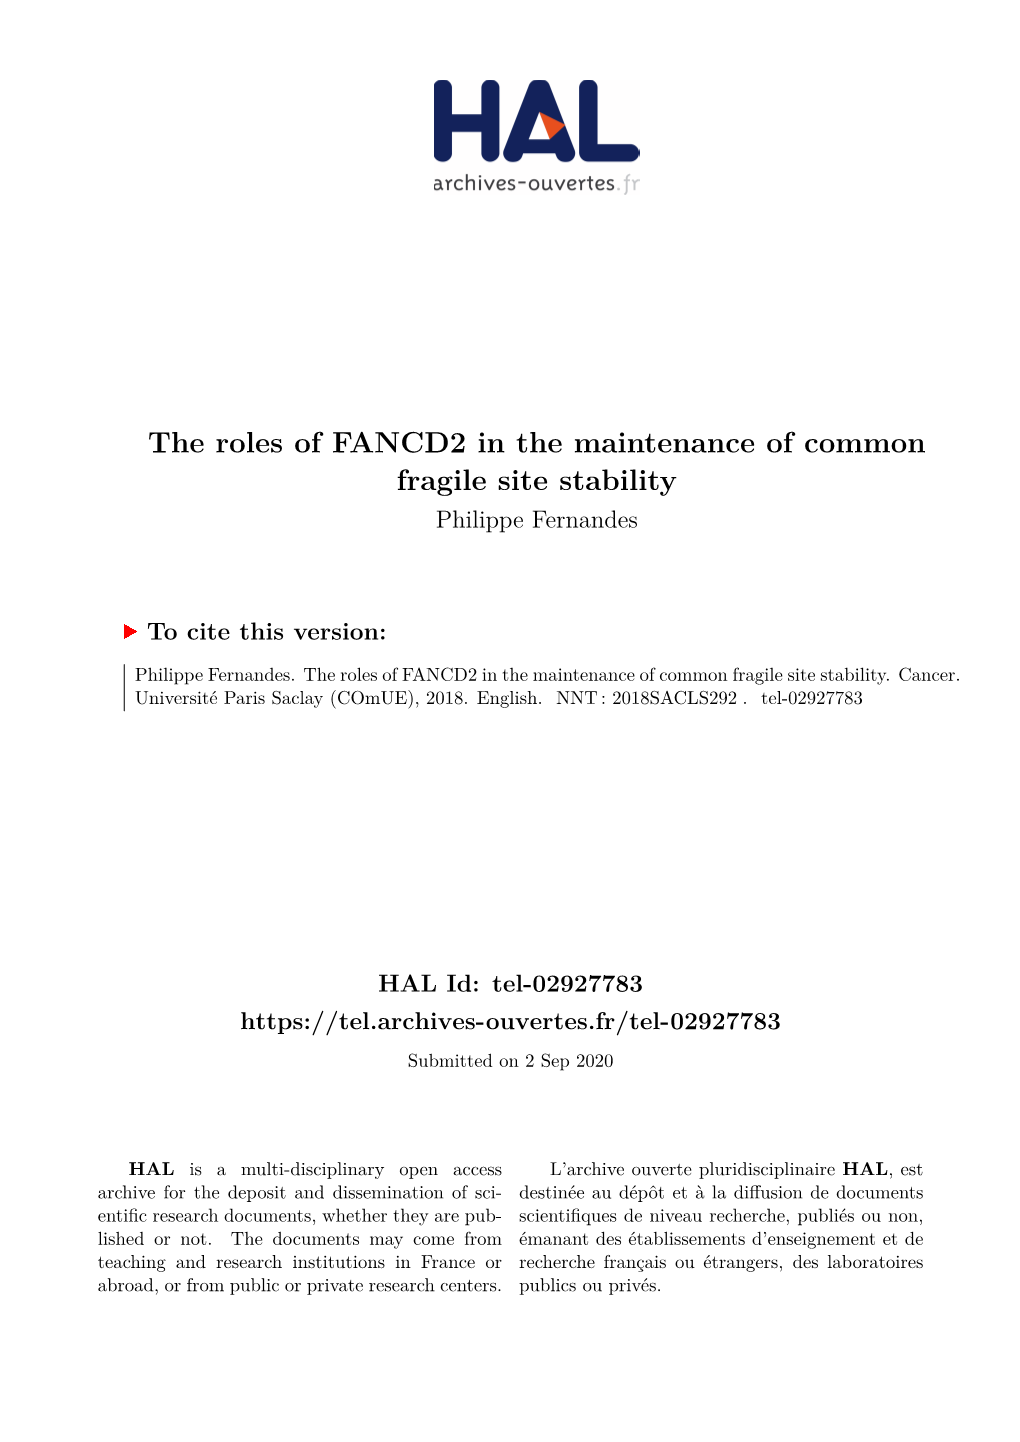 The Roles of FANCD2 in the Maintenance of Common Fragile Site Stability Philippe Fernandes